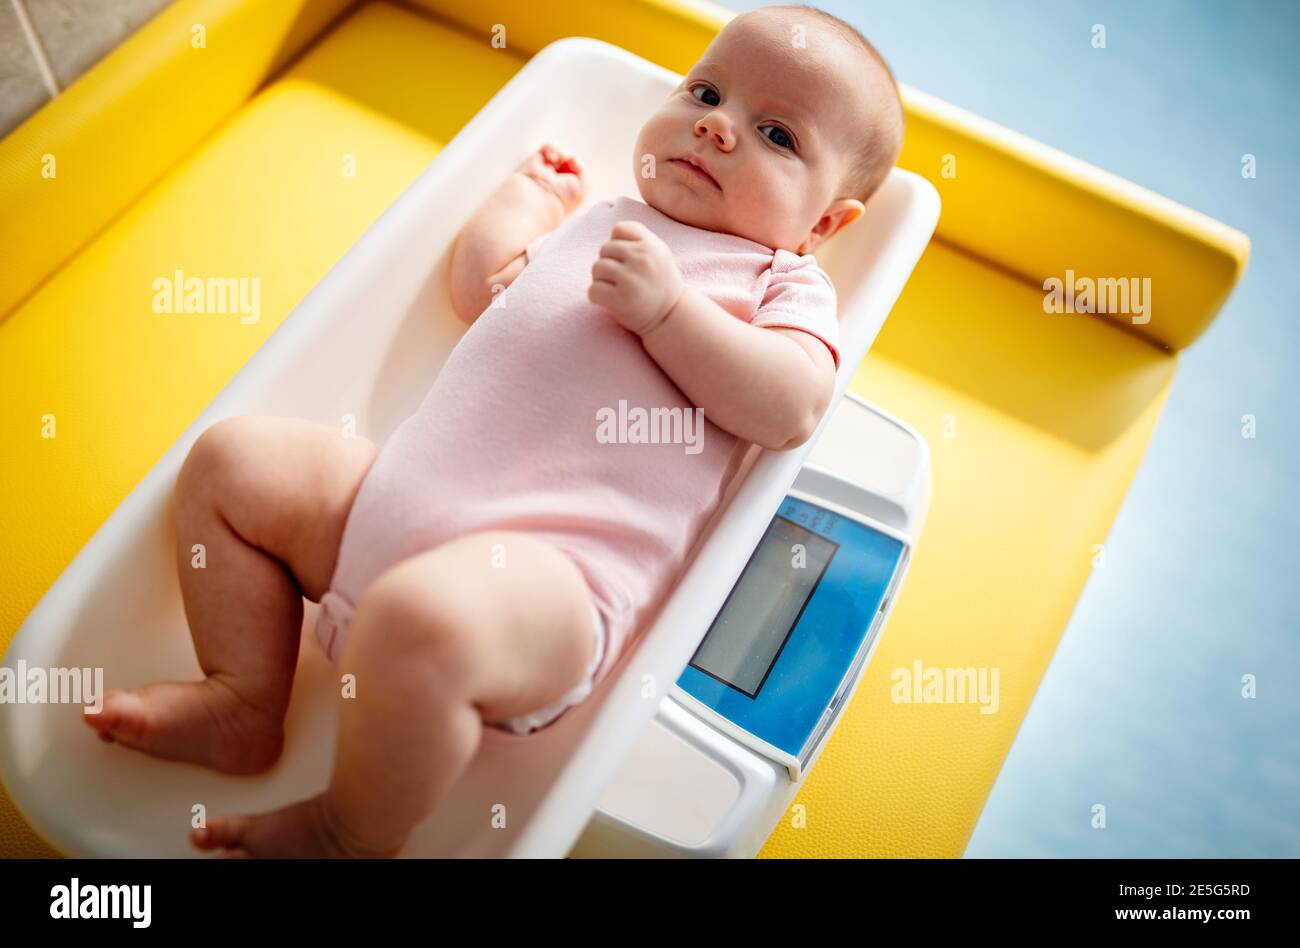 Beautiful newborn baby on weighing scale. Health, baby weight concept. Stock Photo